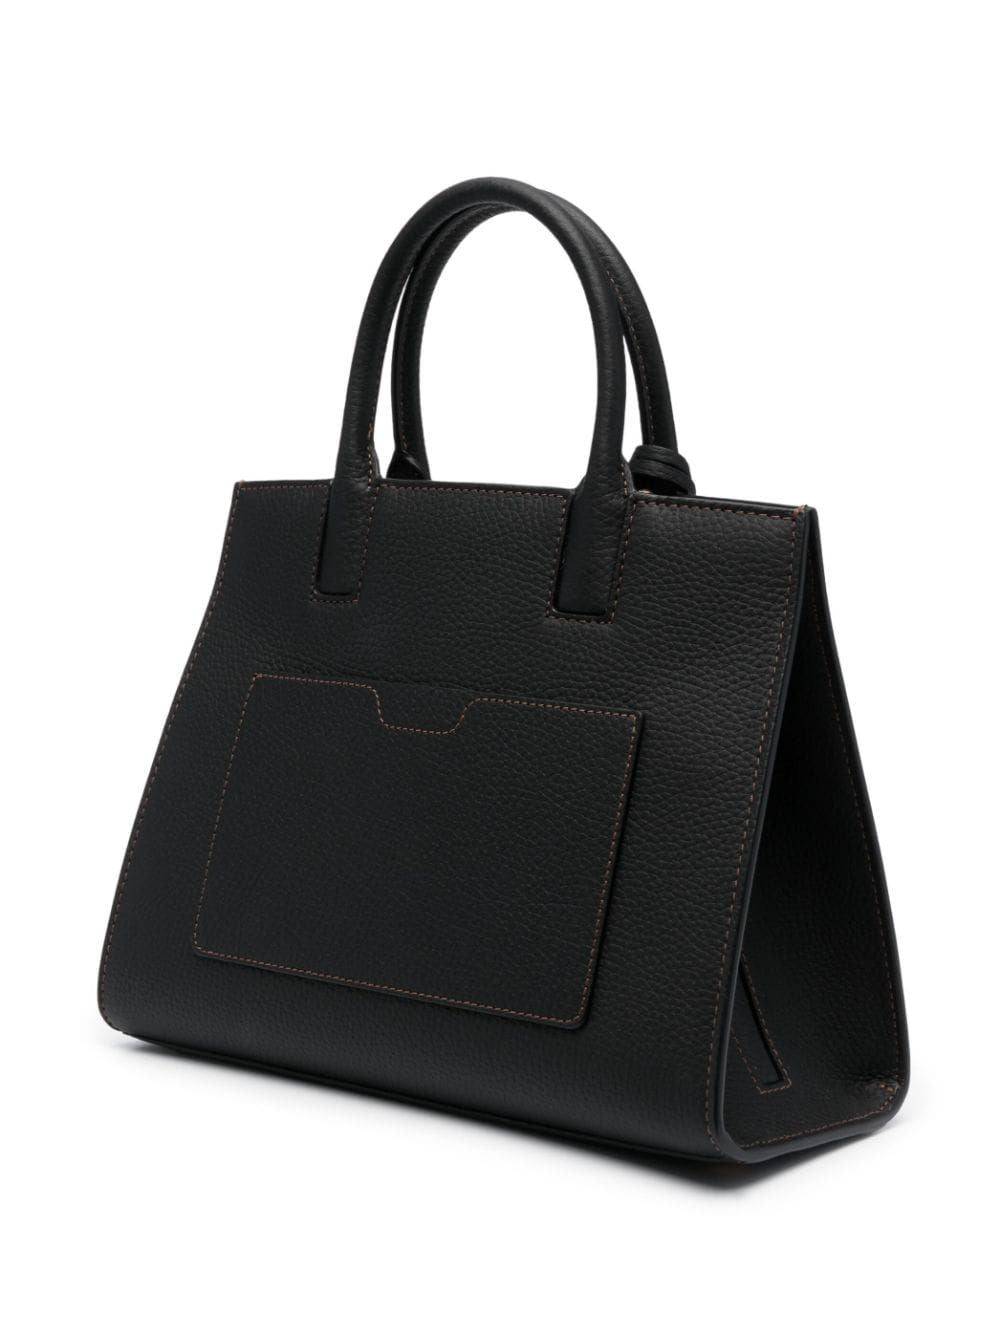 BURBERRY Mini Frances Black Calf Leather Top-Handle Tote for Women